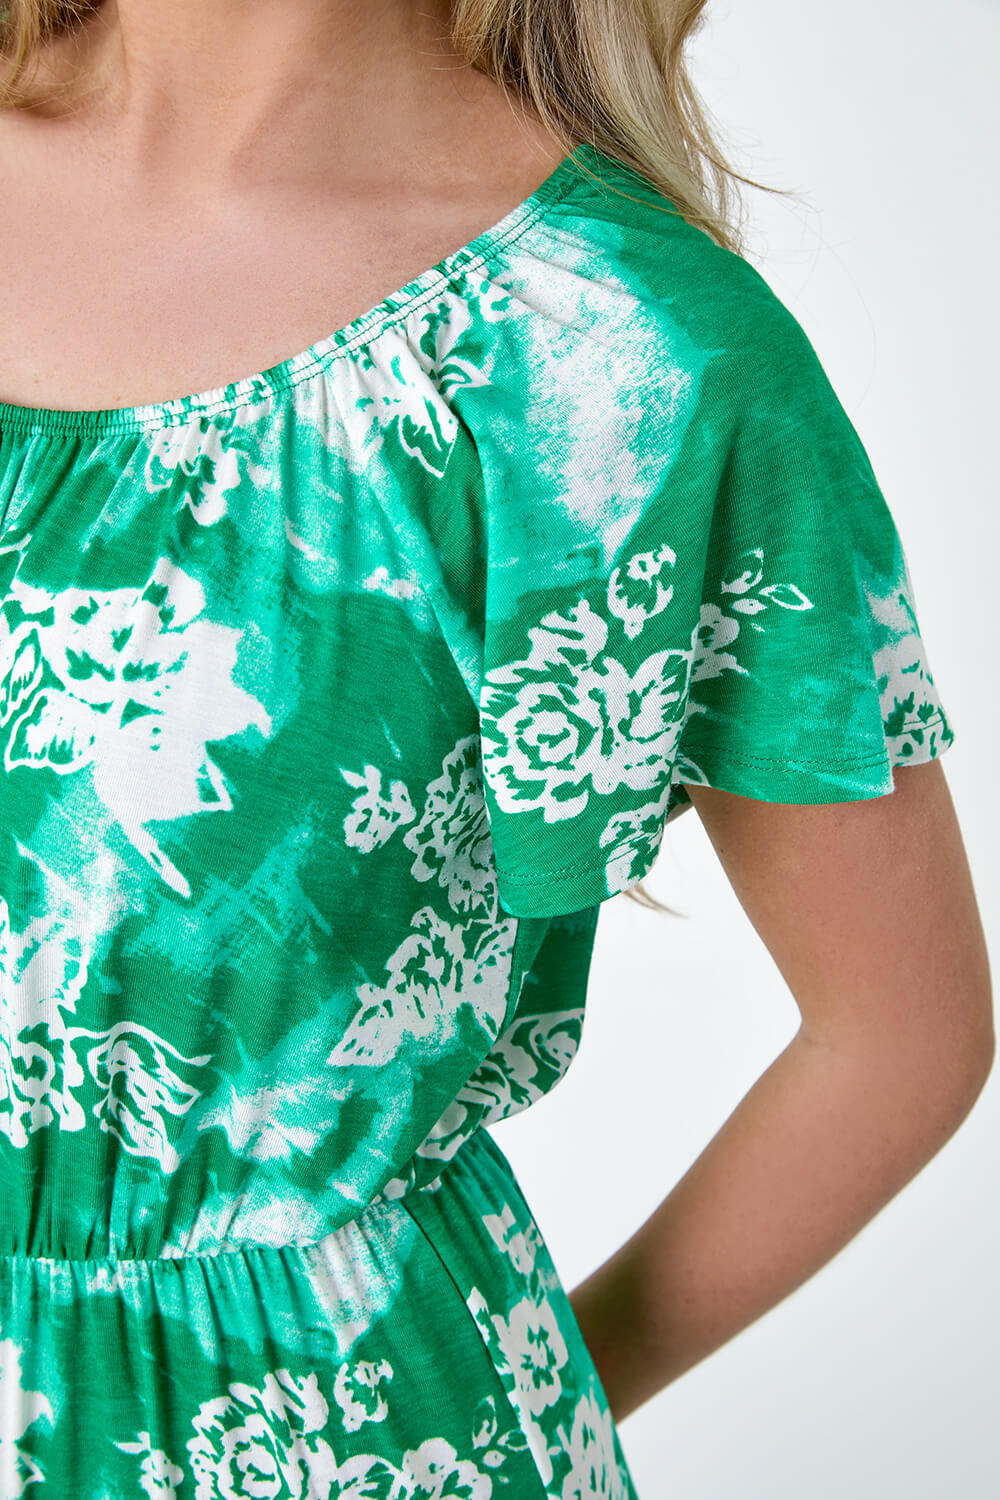 Green Petite Abstract Floral Stretch Frill Dress, Image 5 of 5